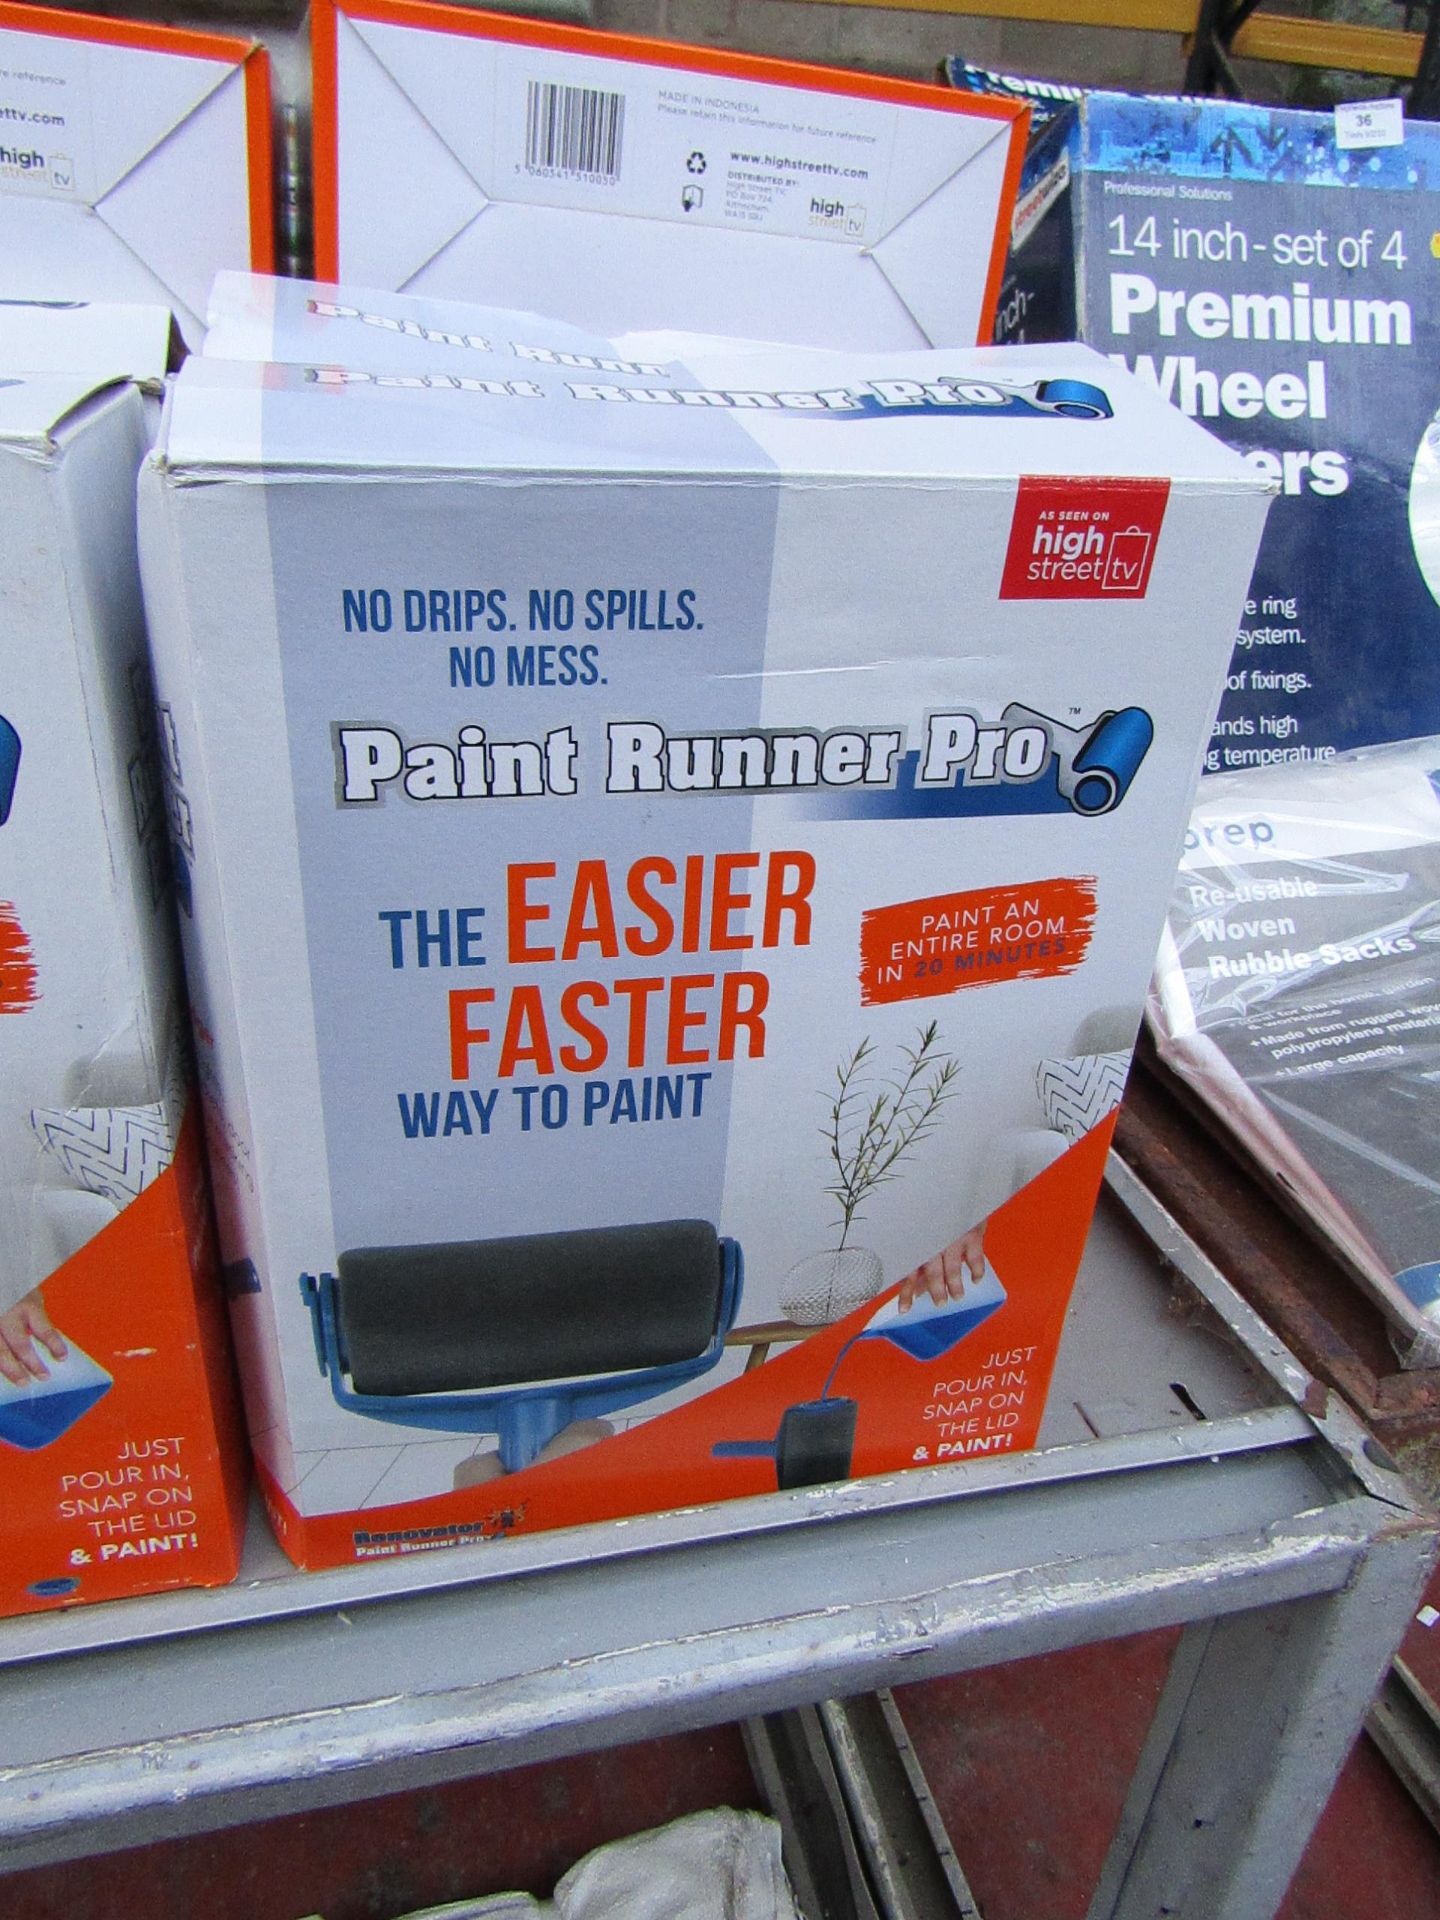 | 1x | PAINT RUNNER PRO | UNCHECKED AND BOXED | NO ONLINE RE-SALE| SKU C5060541510050 | RRP £29.99 |